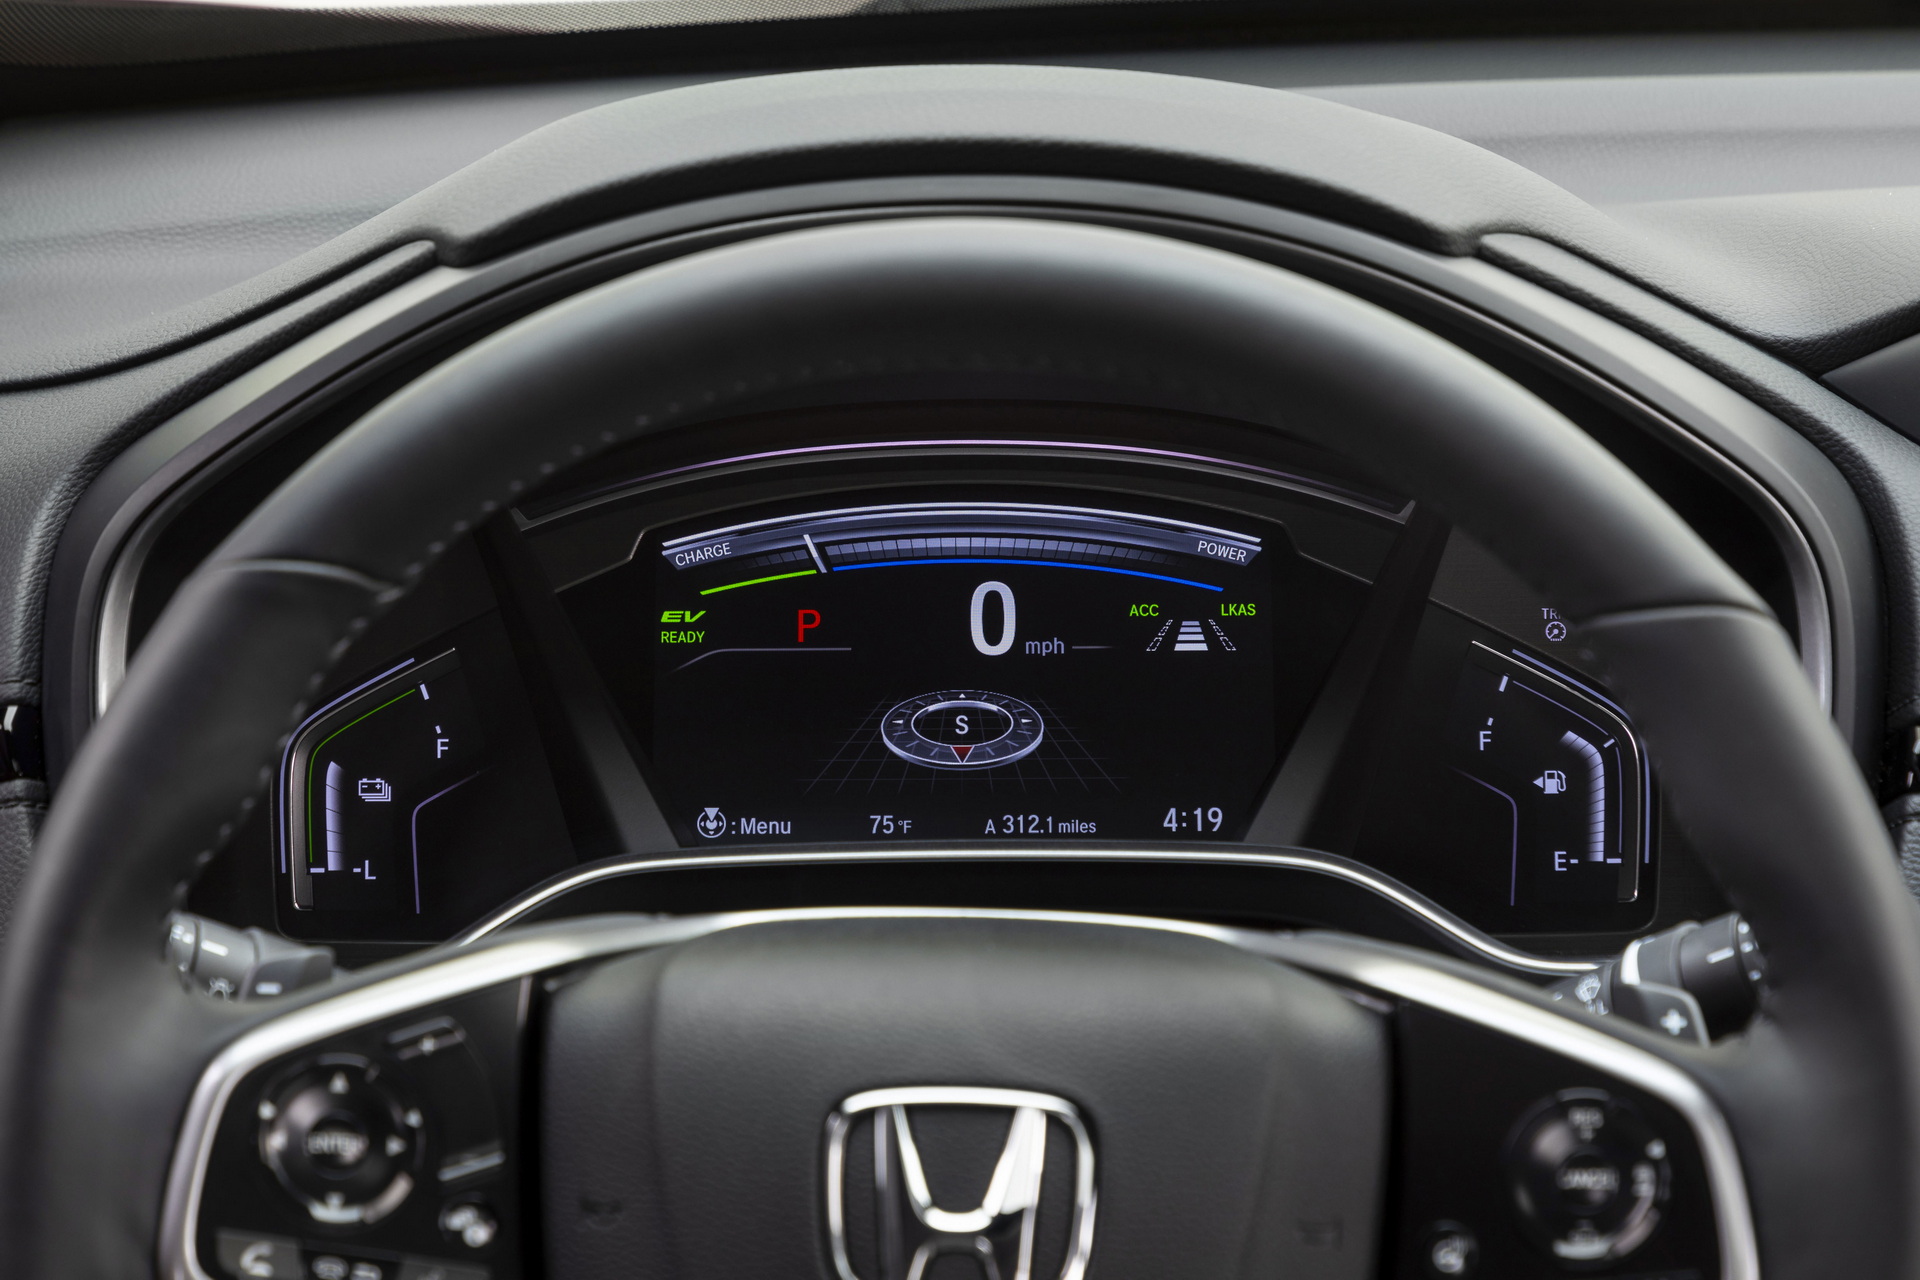 You may not be able to trust the fuel performance of the 2020 Honda CR-V.